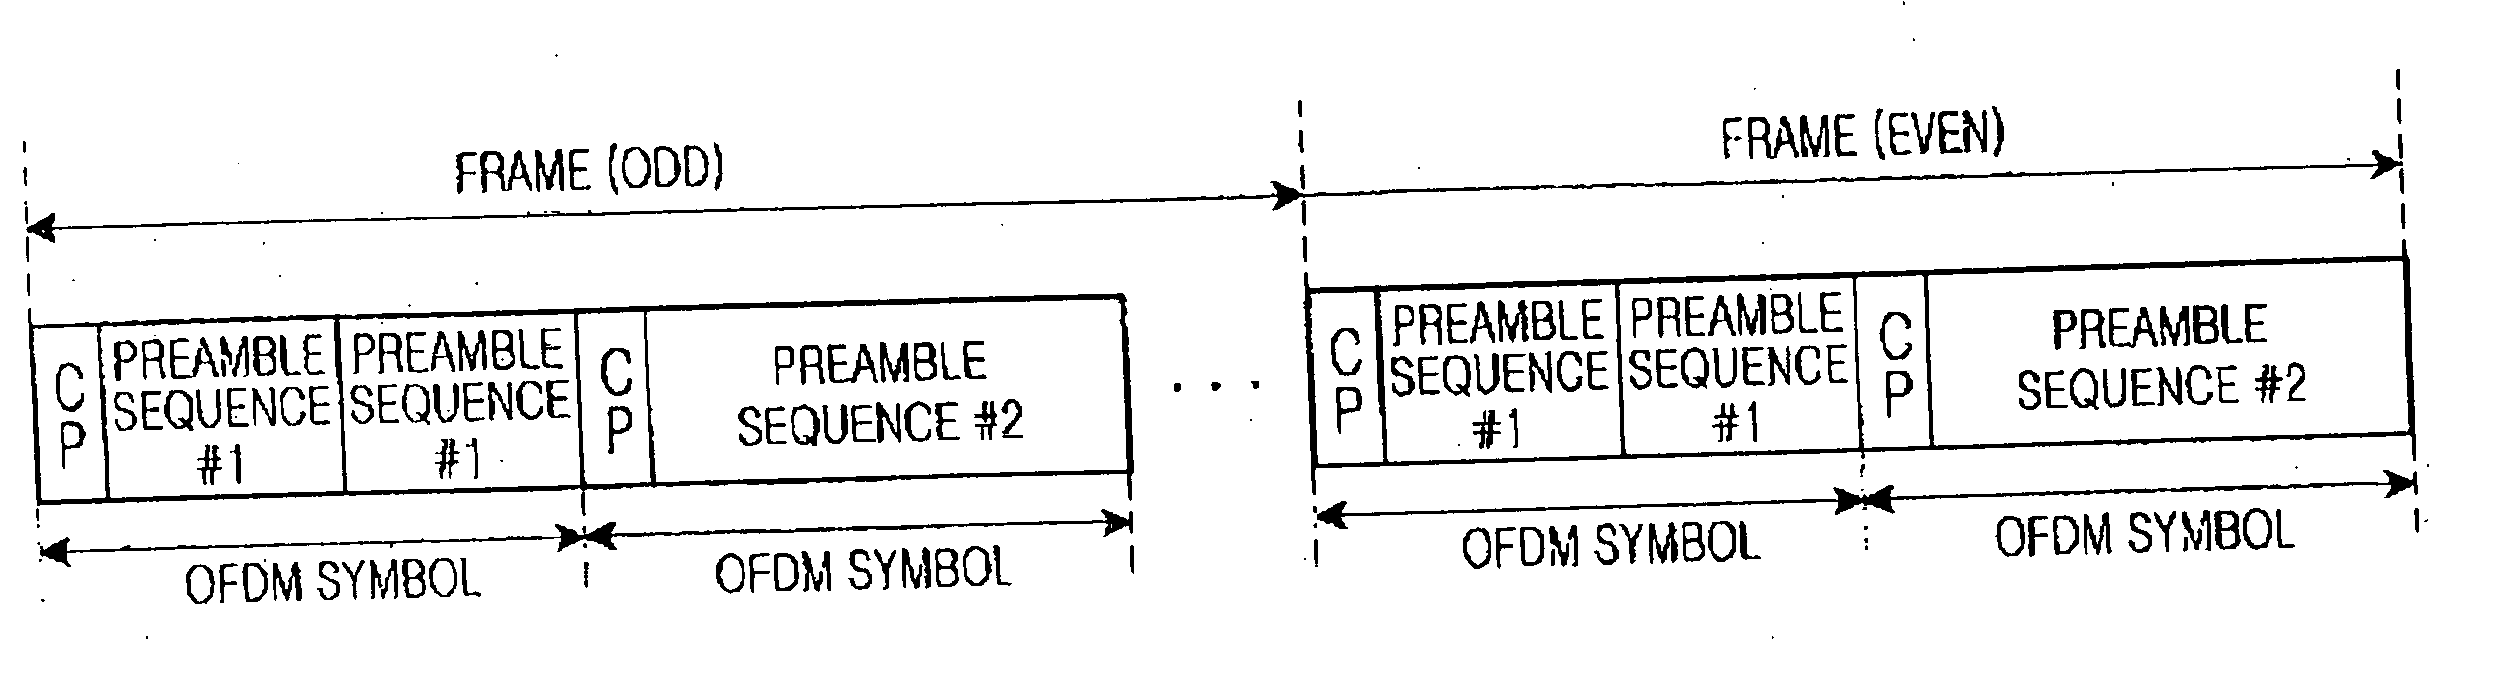 Method for transmitting and receiving preamble sequences in an orthogonal frequency division multiplexing communication system using a multiple input multiple output scheme